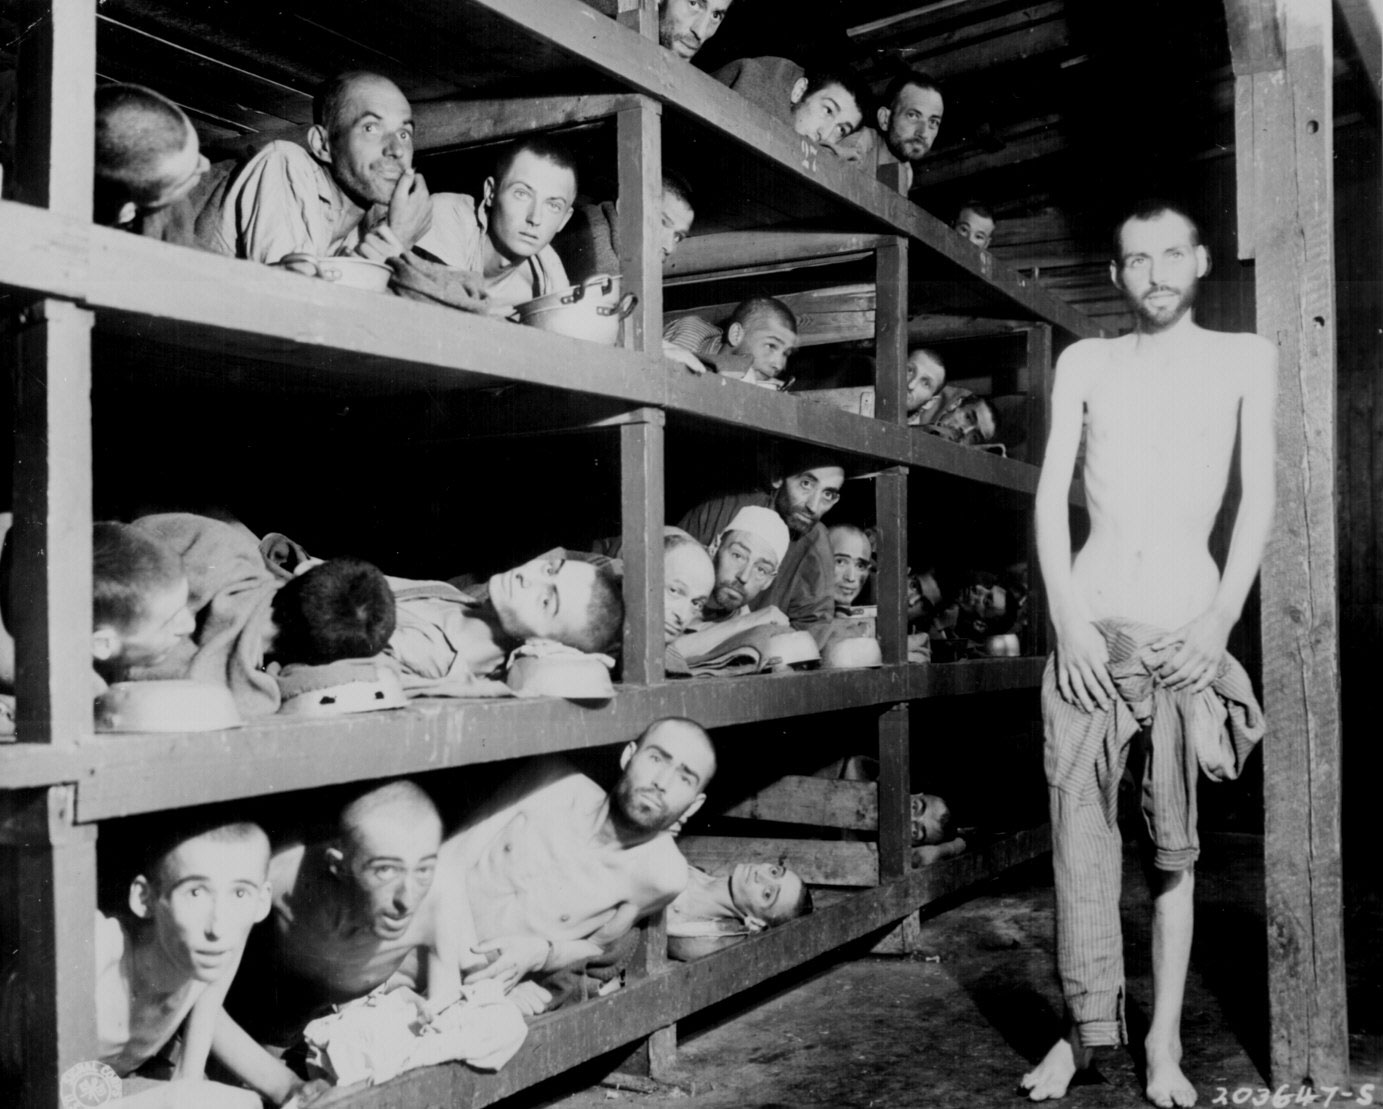 Prisoners at Buchenwald concentration camp, Germany, 16 Apr 1945; author Elie Wiesel is in the second row up, seventh from the left, next to the bunk post (US National Archives: 208-AA-206K-31)